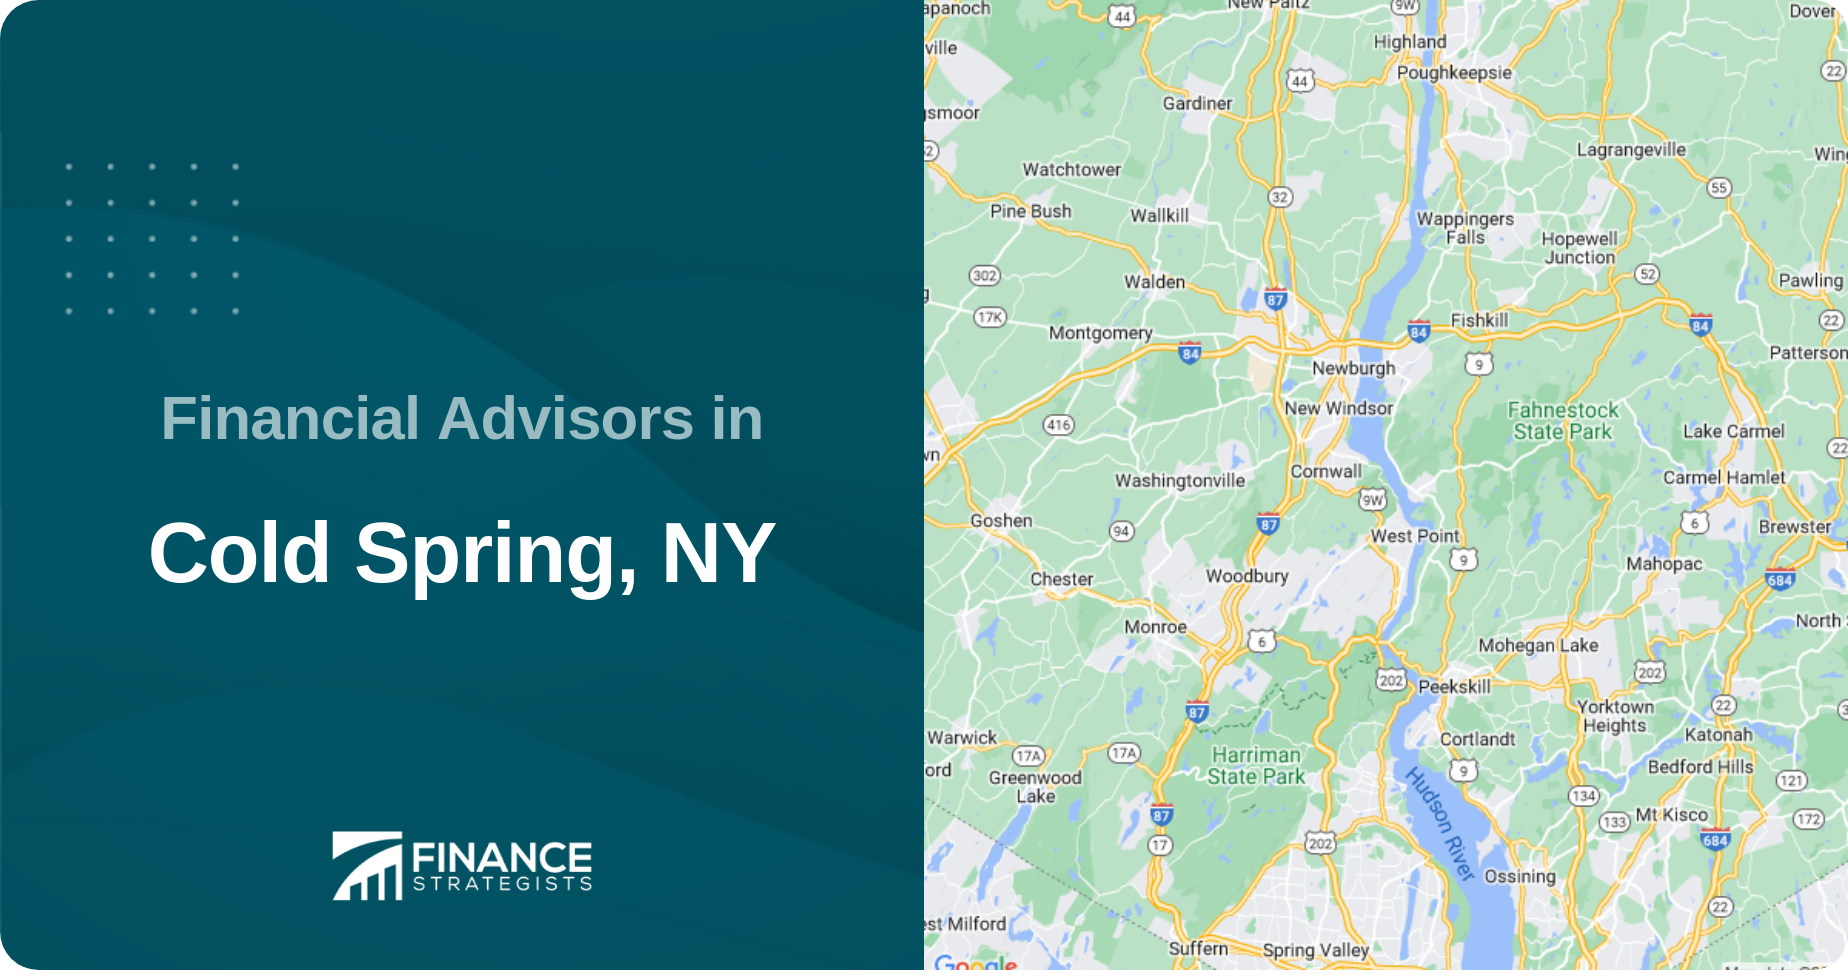 Financial Advisors in Cold Spring, NY